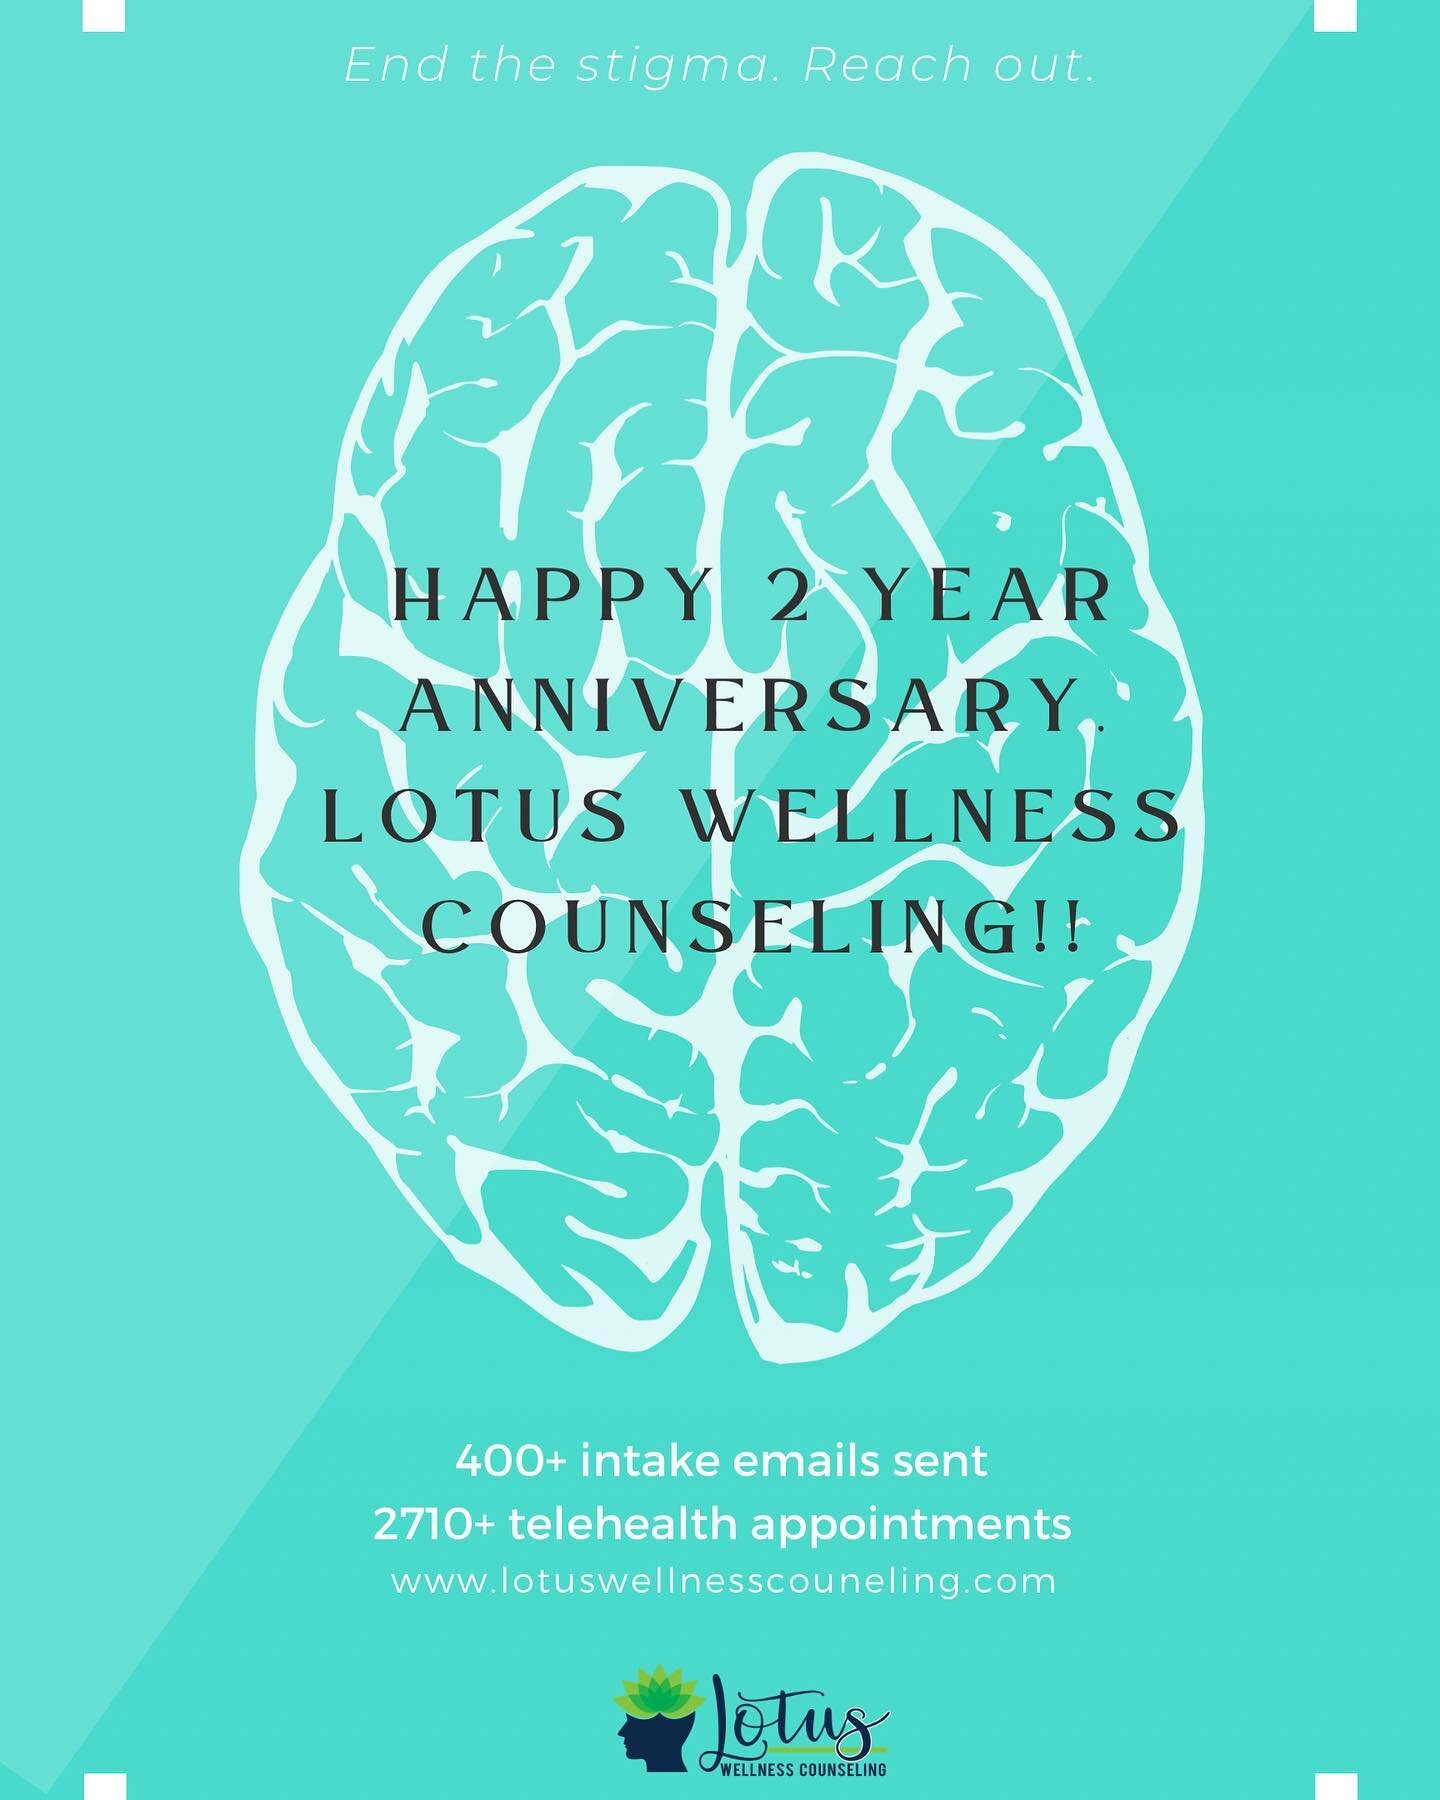 I cannot believe that Lotus Wellness Counseling is celebrating its 2 year anniversary!! There&rsquo;s been a lot of ups and downs, but that&rsquo;s the only way to grow! I&rsquo;m excited to see what year 3 has in store and the growth that LWC will c